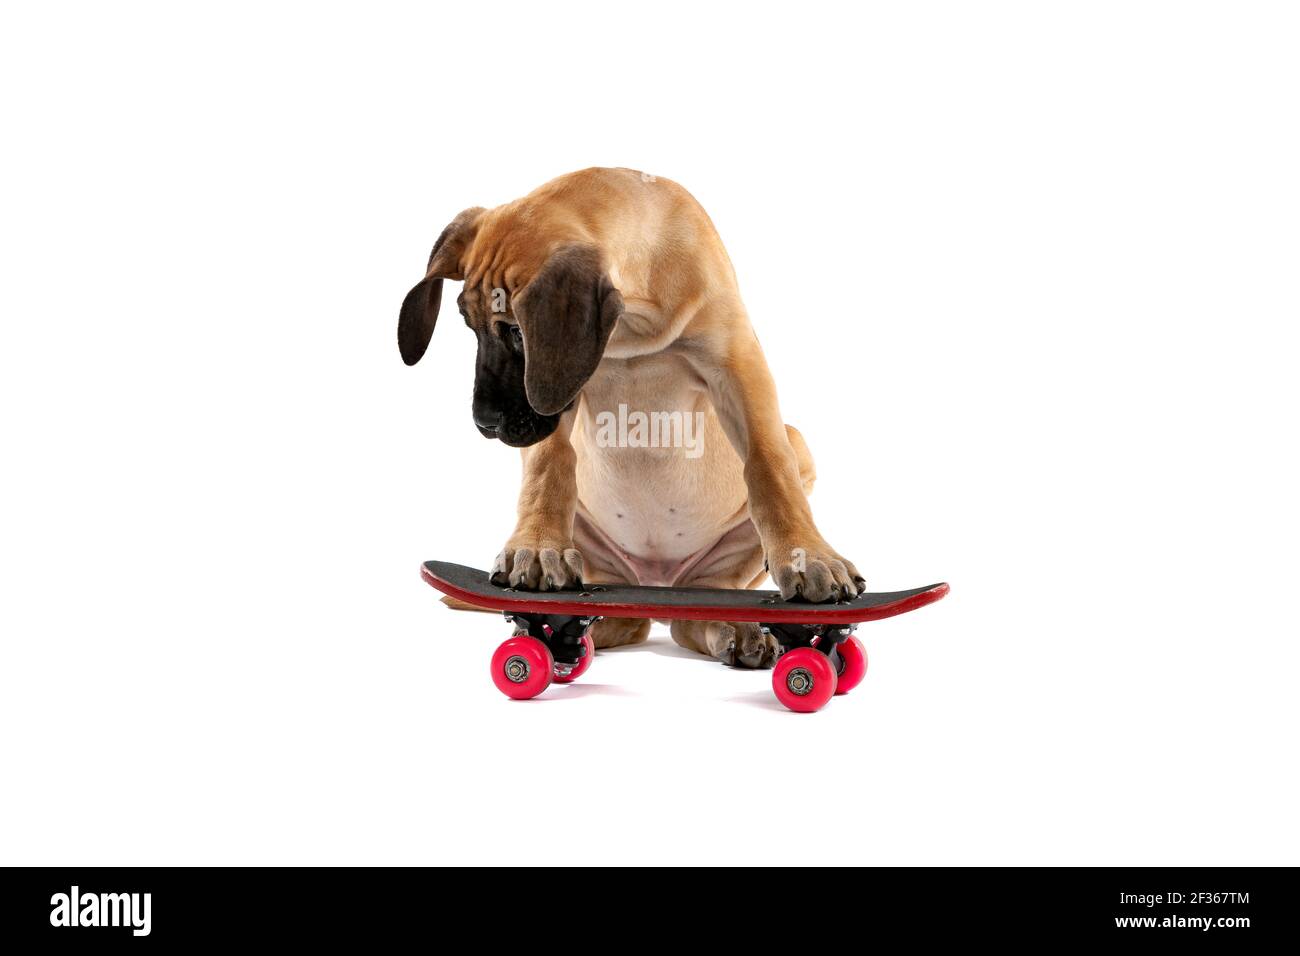 brown coloured great Dane puppy dog trying to ride on a skateboard in front of a white background Stock Photo